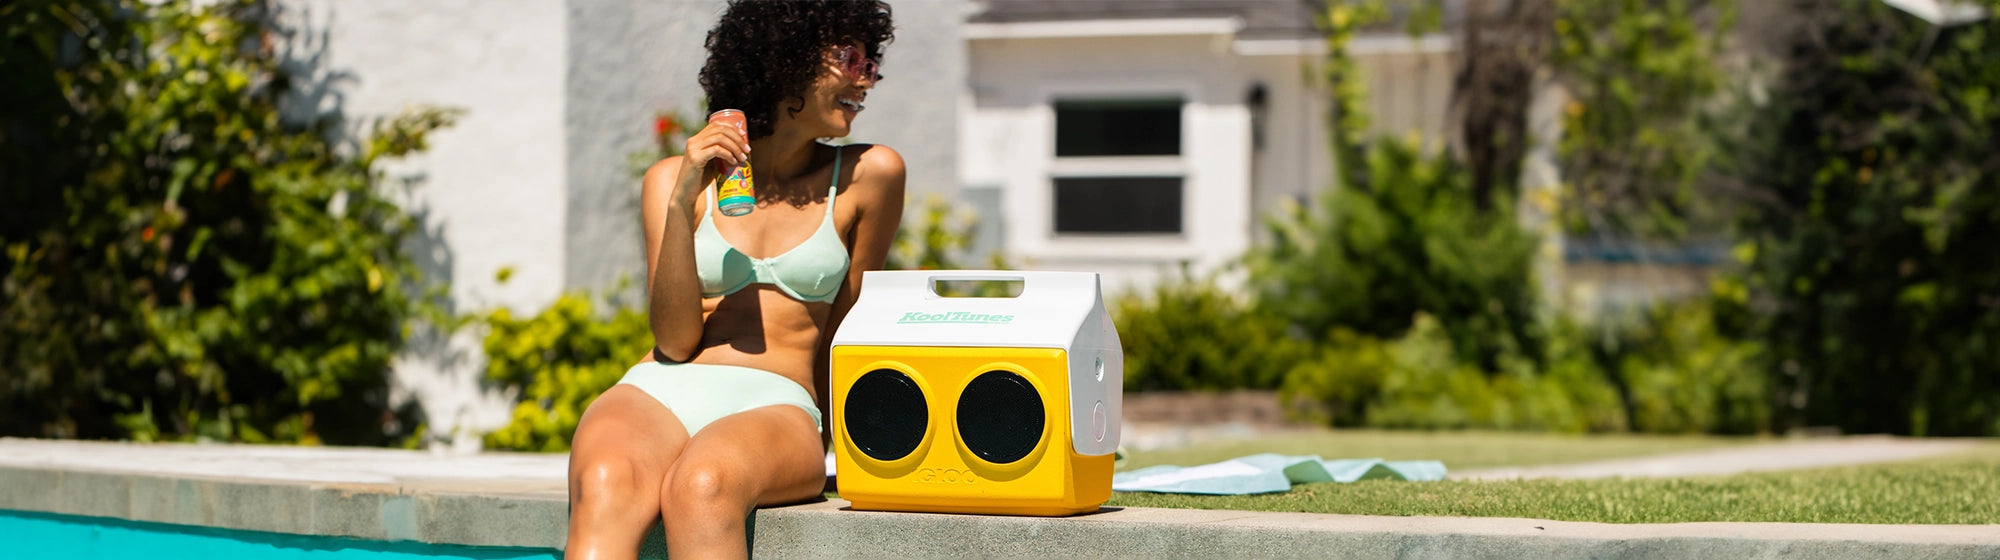 woman with yellow igloo playmate cooler by pool